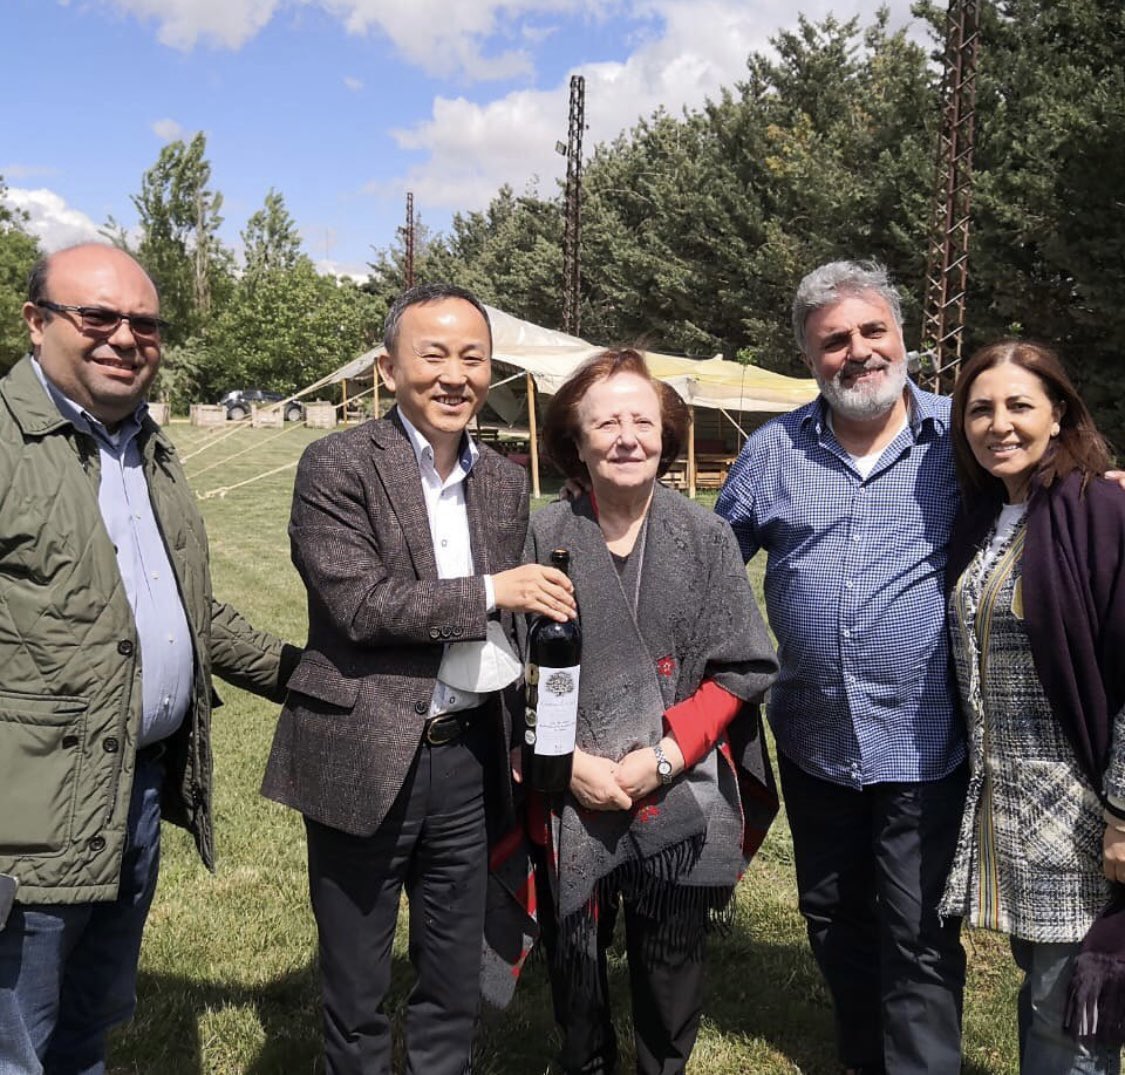 A great pleasure to welcome HE Ambassador Park Il and Consul Kim Cholong of The Republic of Korea.
Hope to see you again soon
.
#domainewardy #wardystud #wine #winetasting #winelover #redwine #whitewine #rosewine #ambassador #consul #zahle #lebanon #republicofkorea #korea